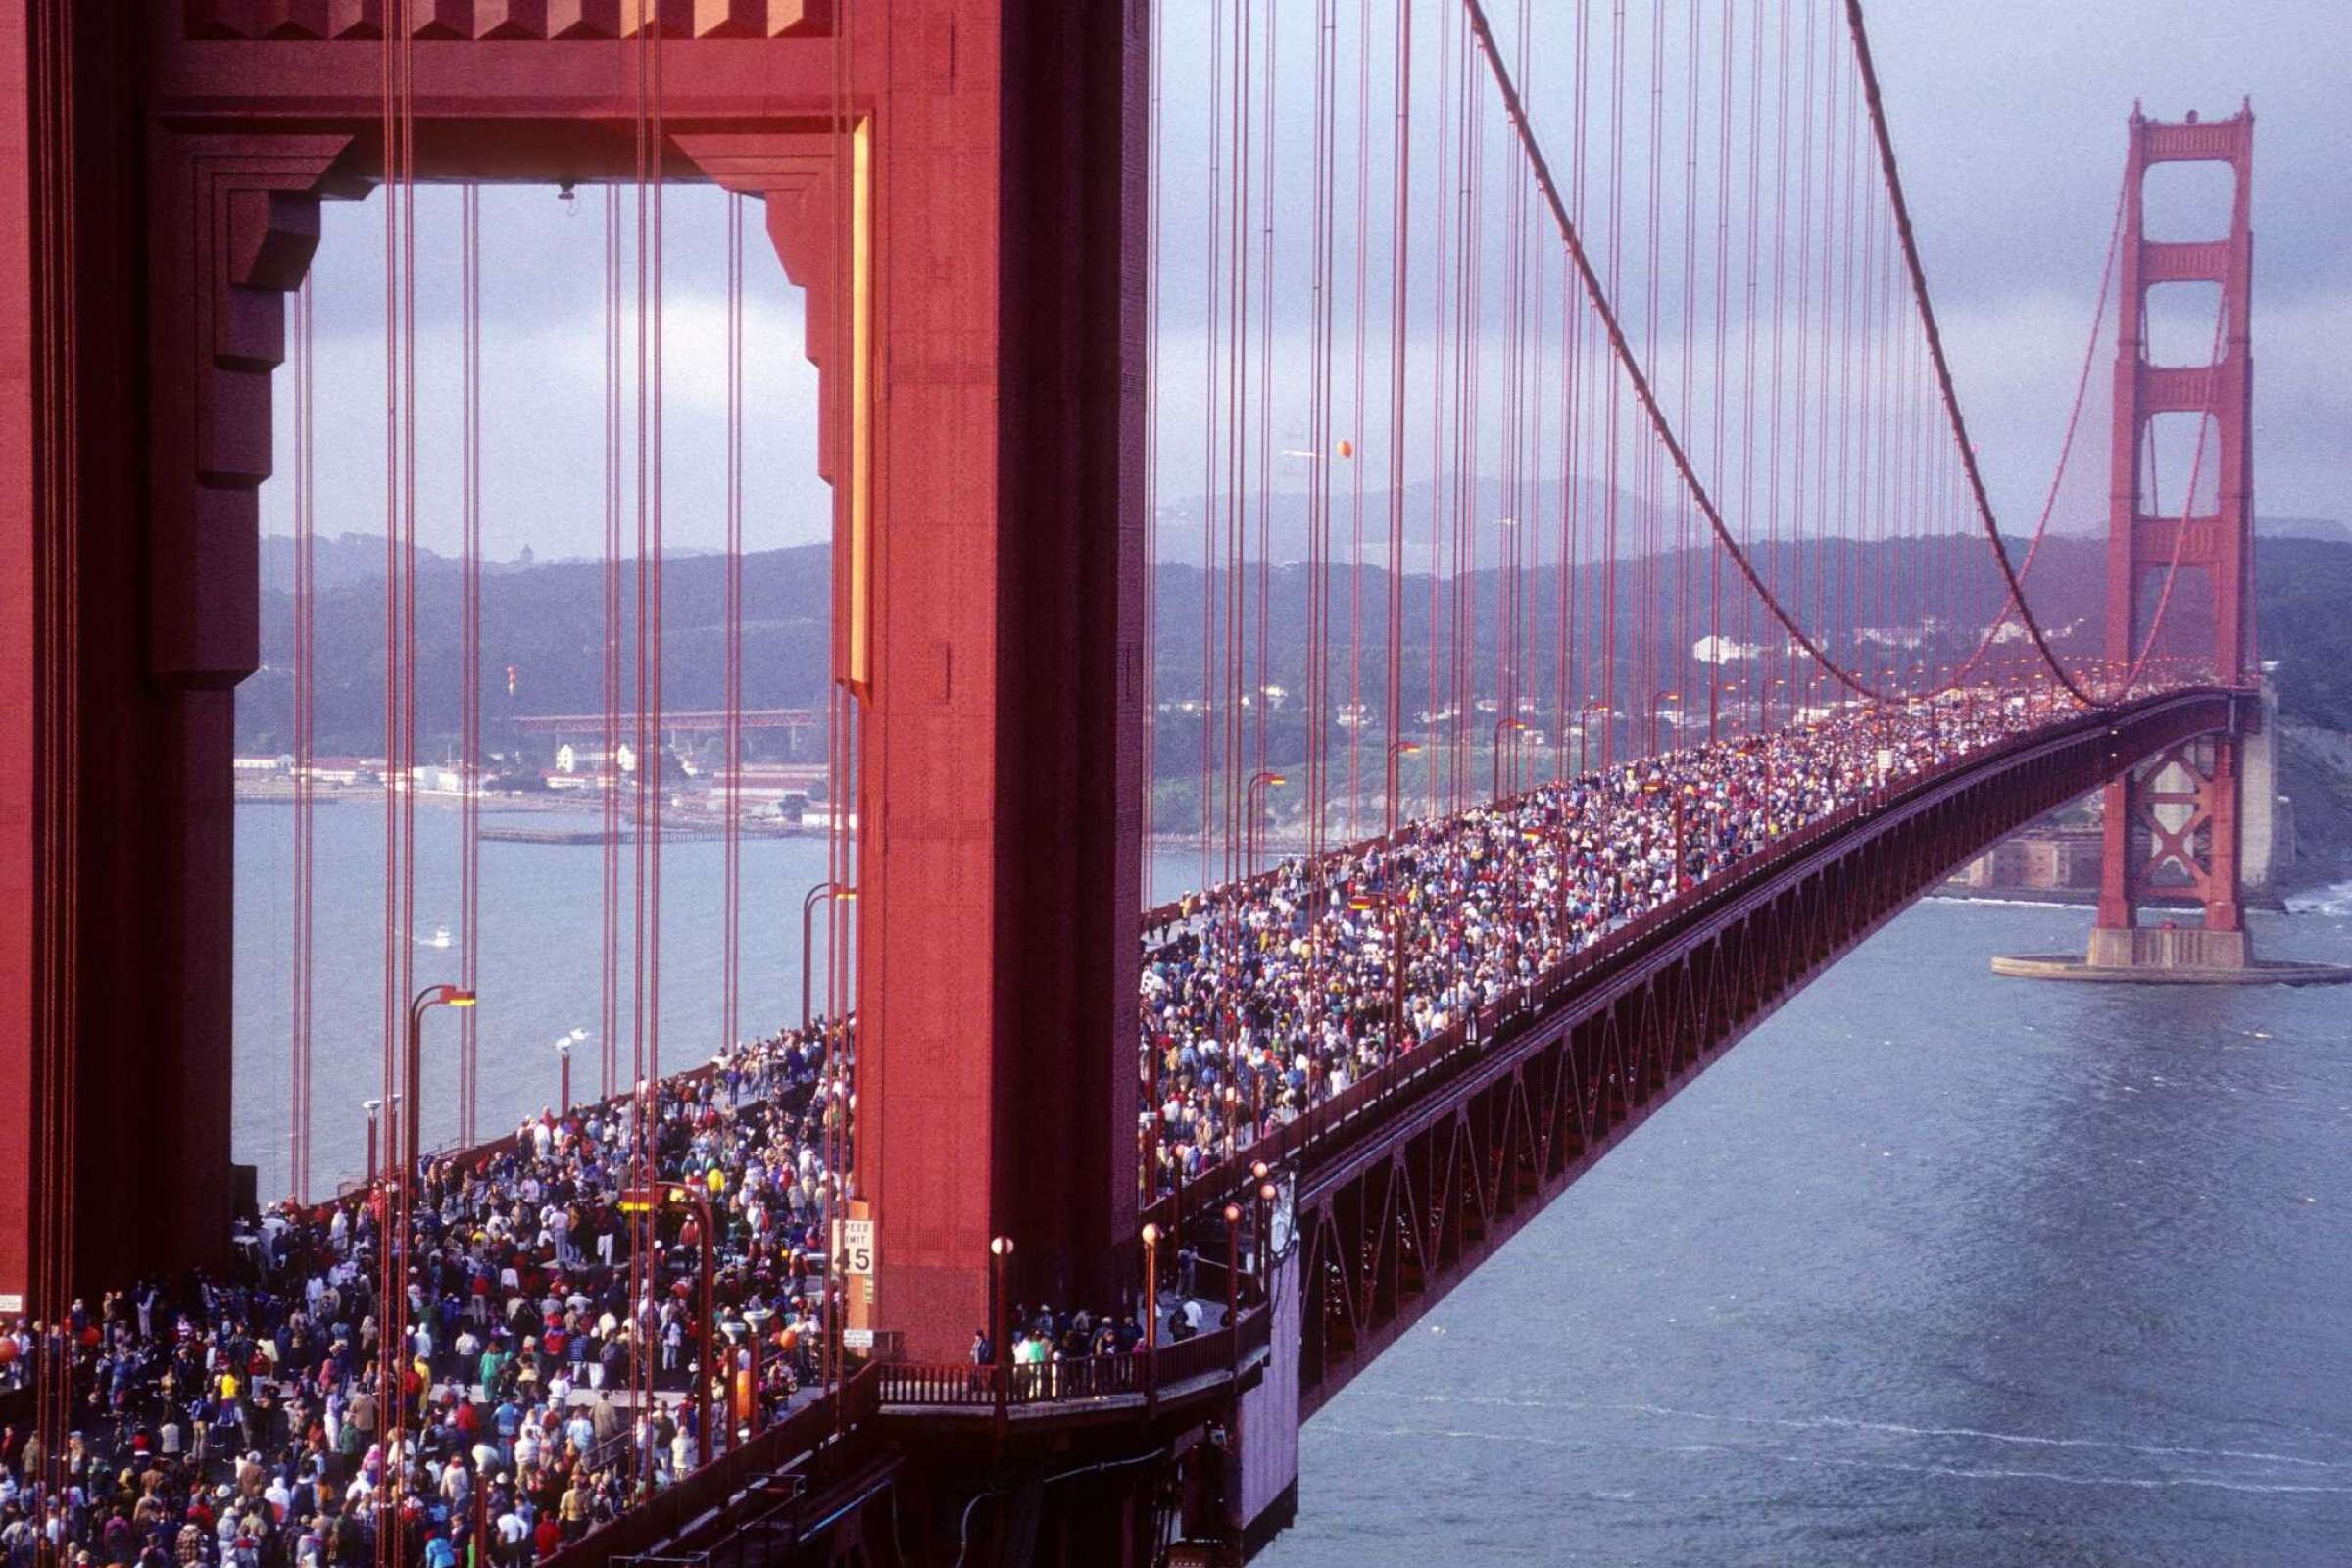 When we became a human gridlock chain on the Golden Gate Bridge